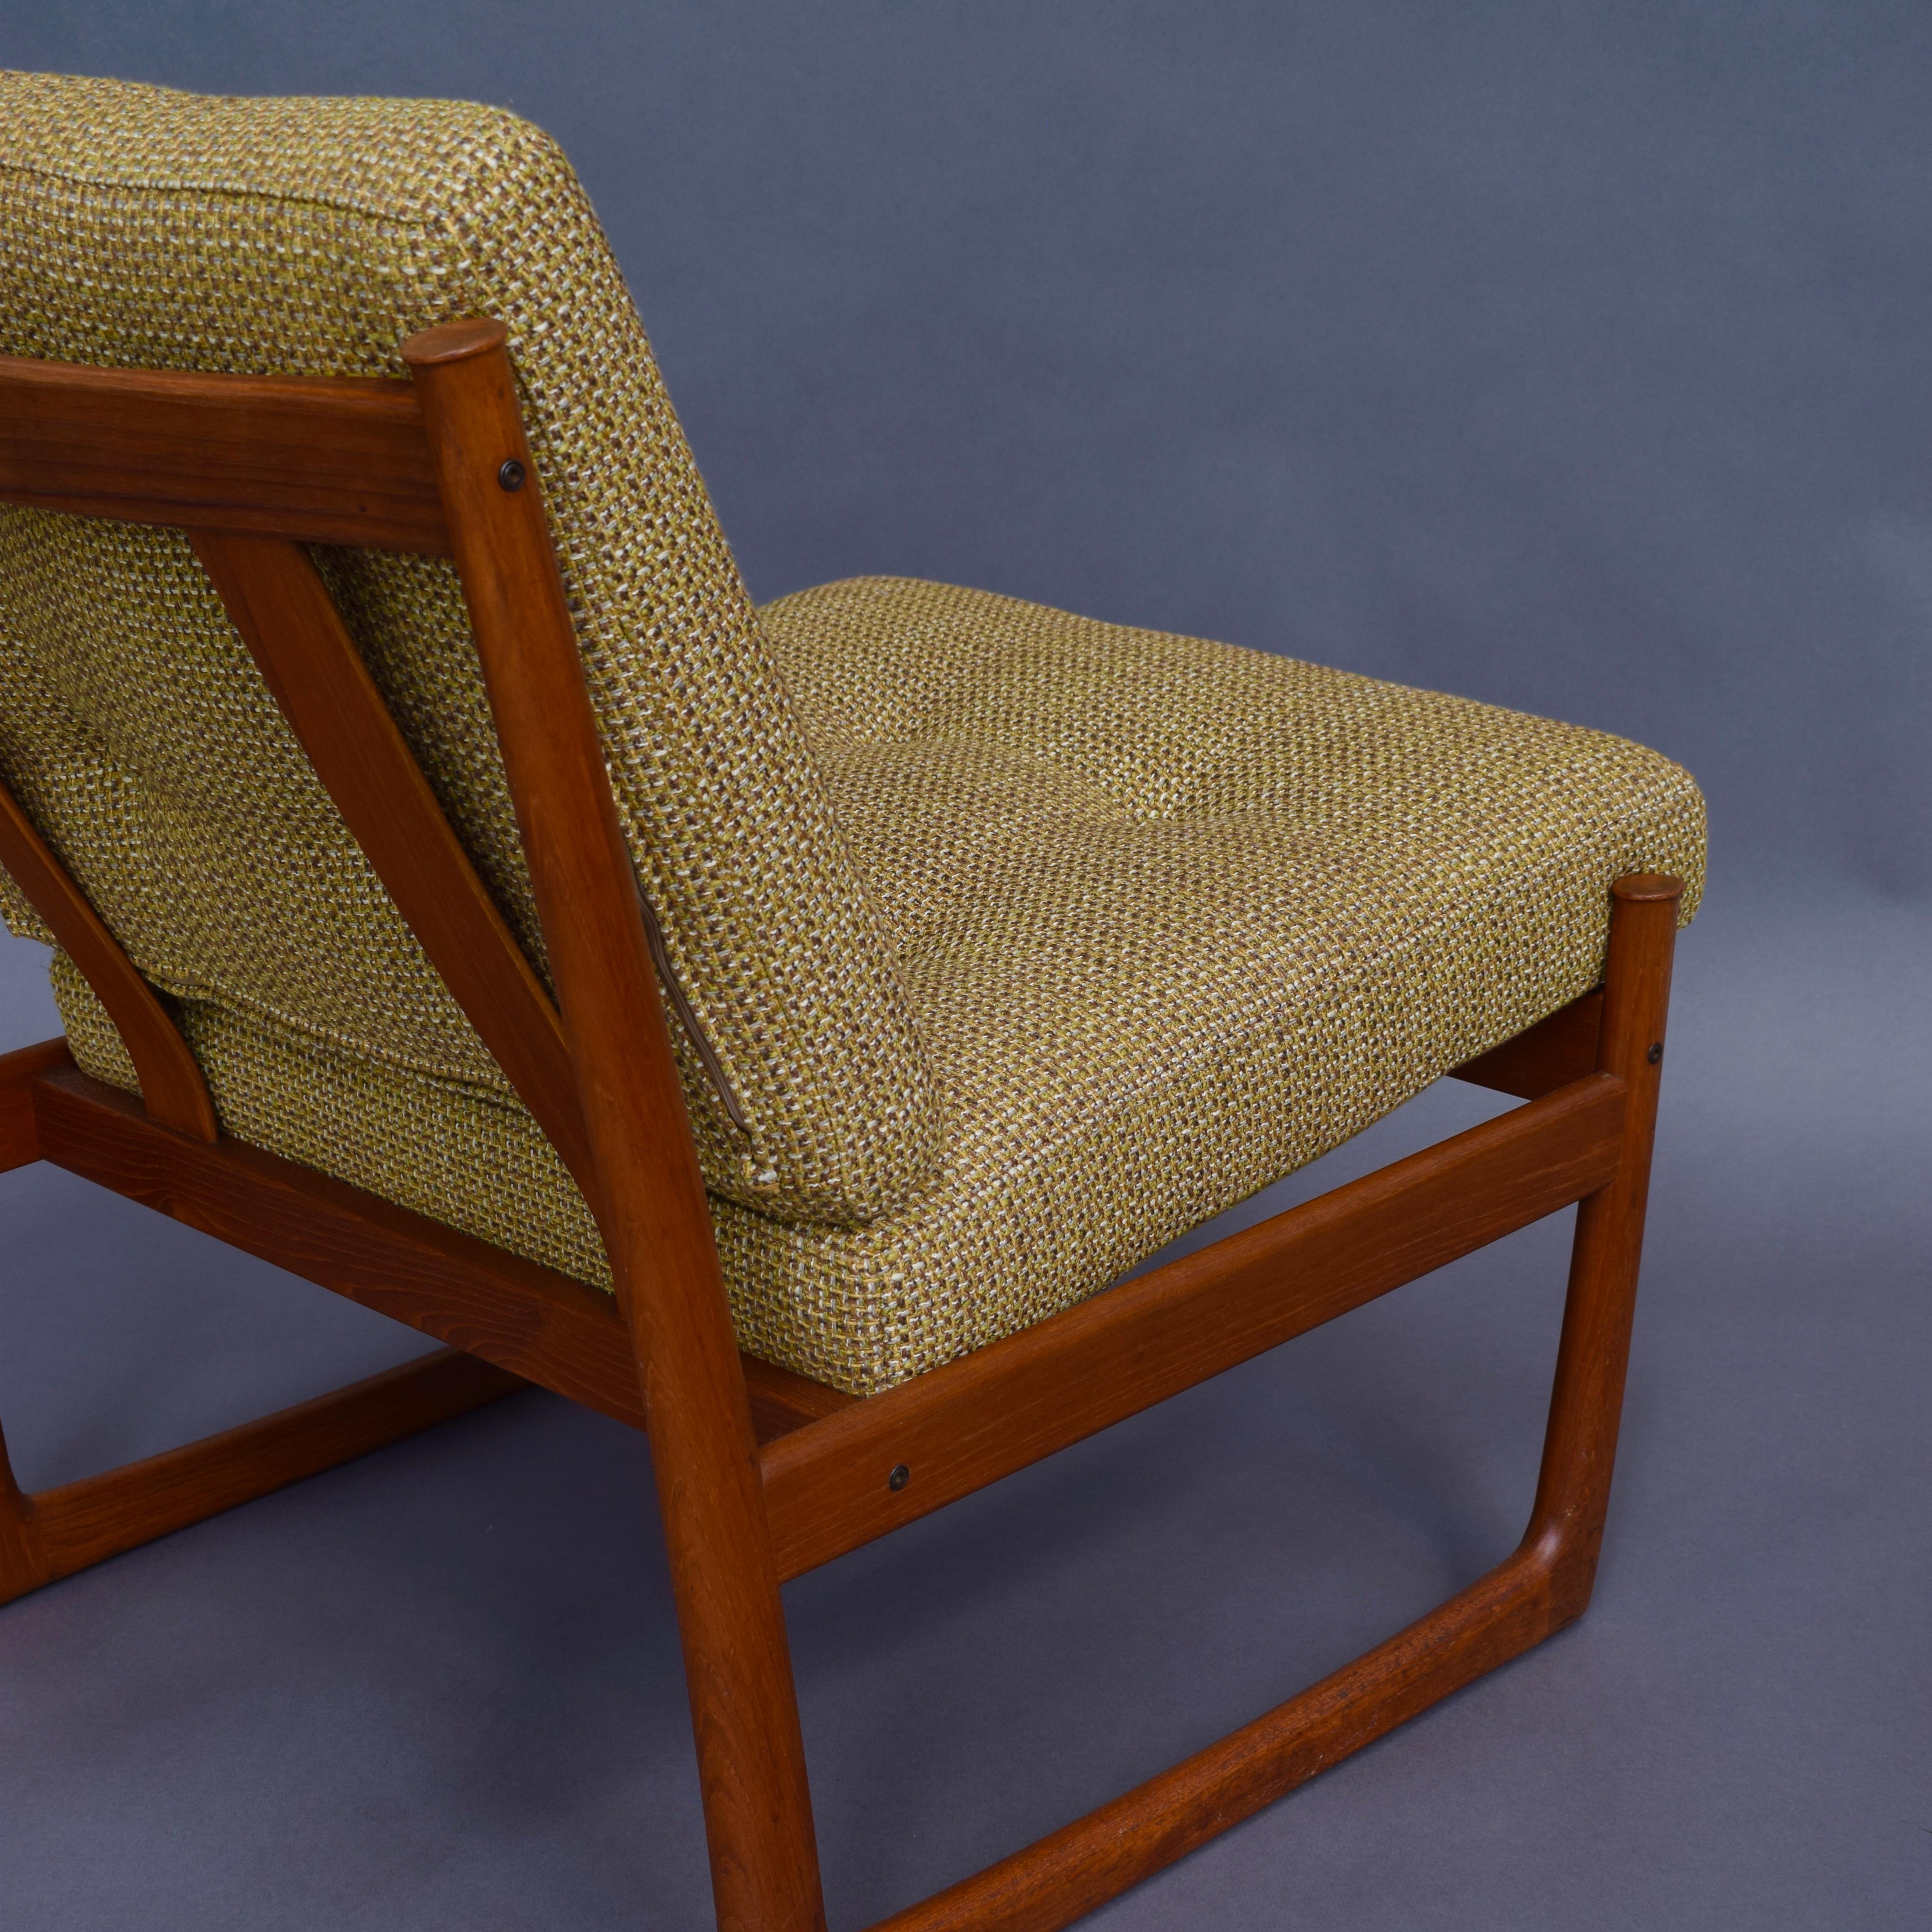 Mid-20th Century Pair of Danish Teak Lounge Chairs by Peter Hvidt and Orla Mølgaard, circa 1960